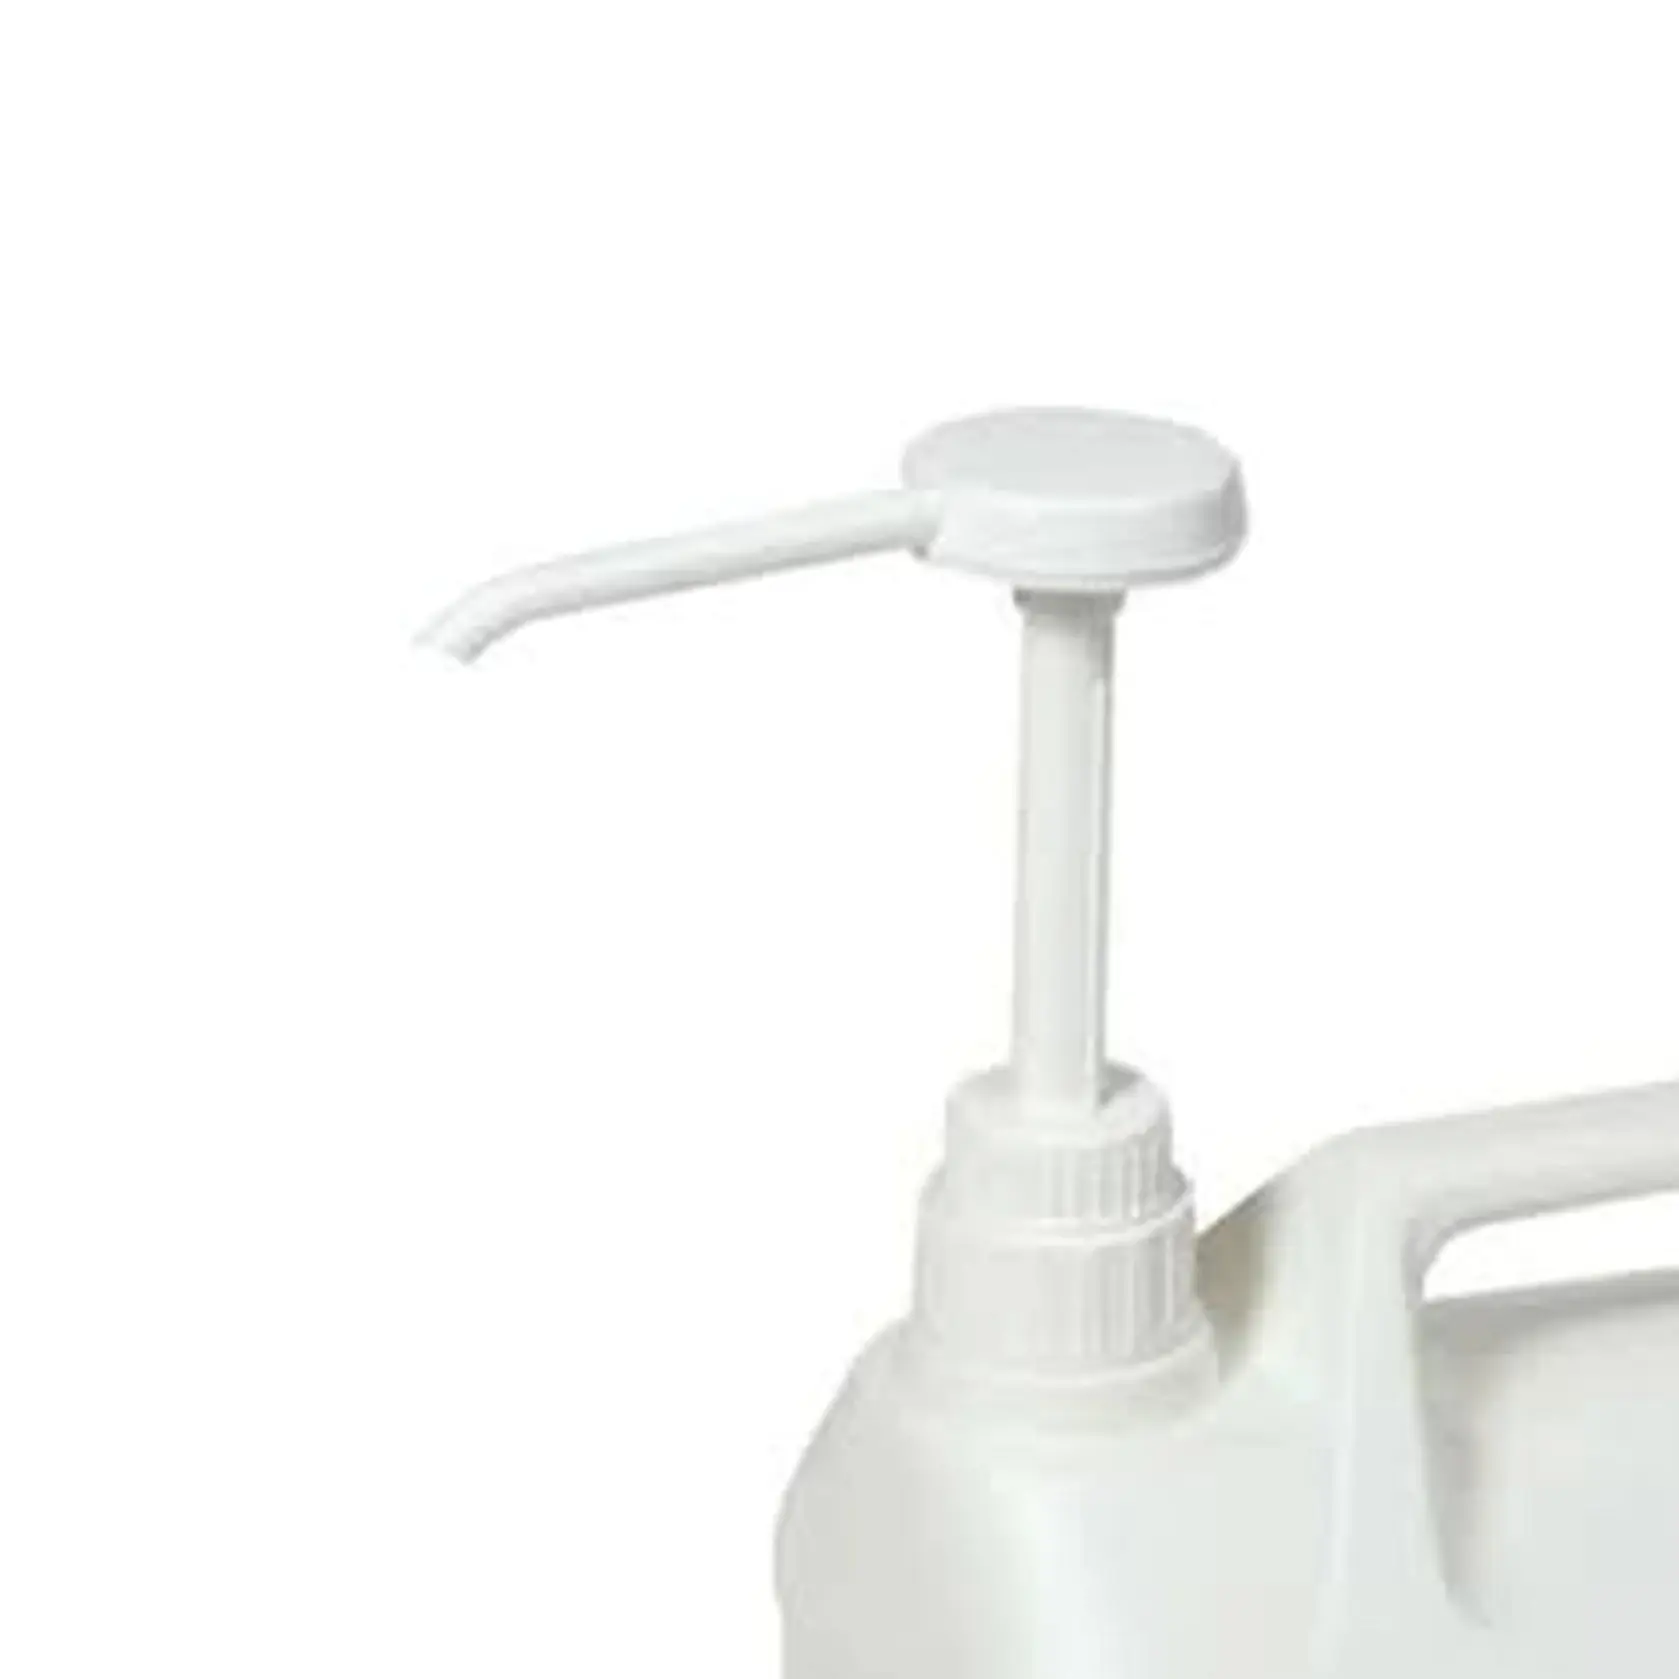 38mm Pump Dispenser to Suit 5 Litre Containers White Dispenses 30ml Dose 